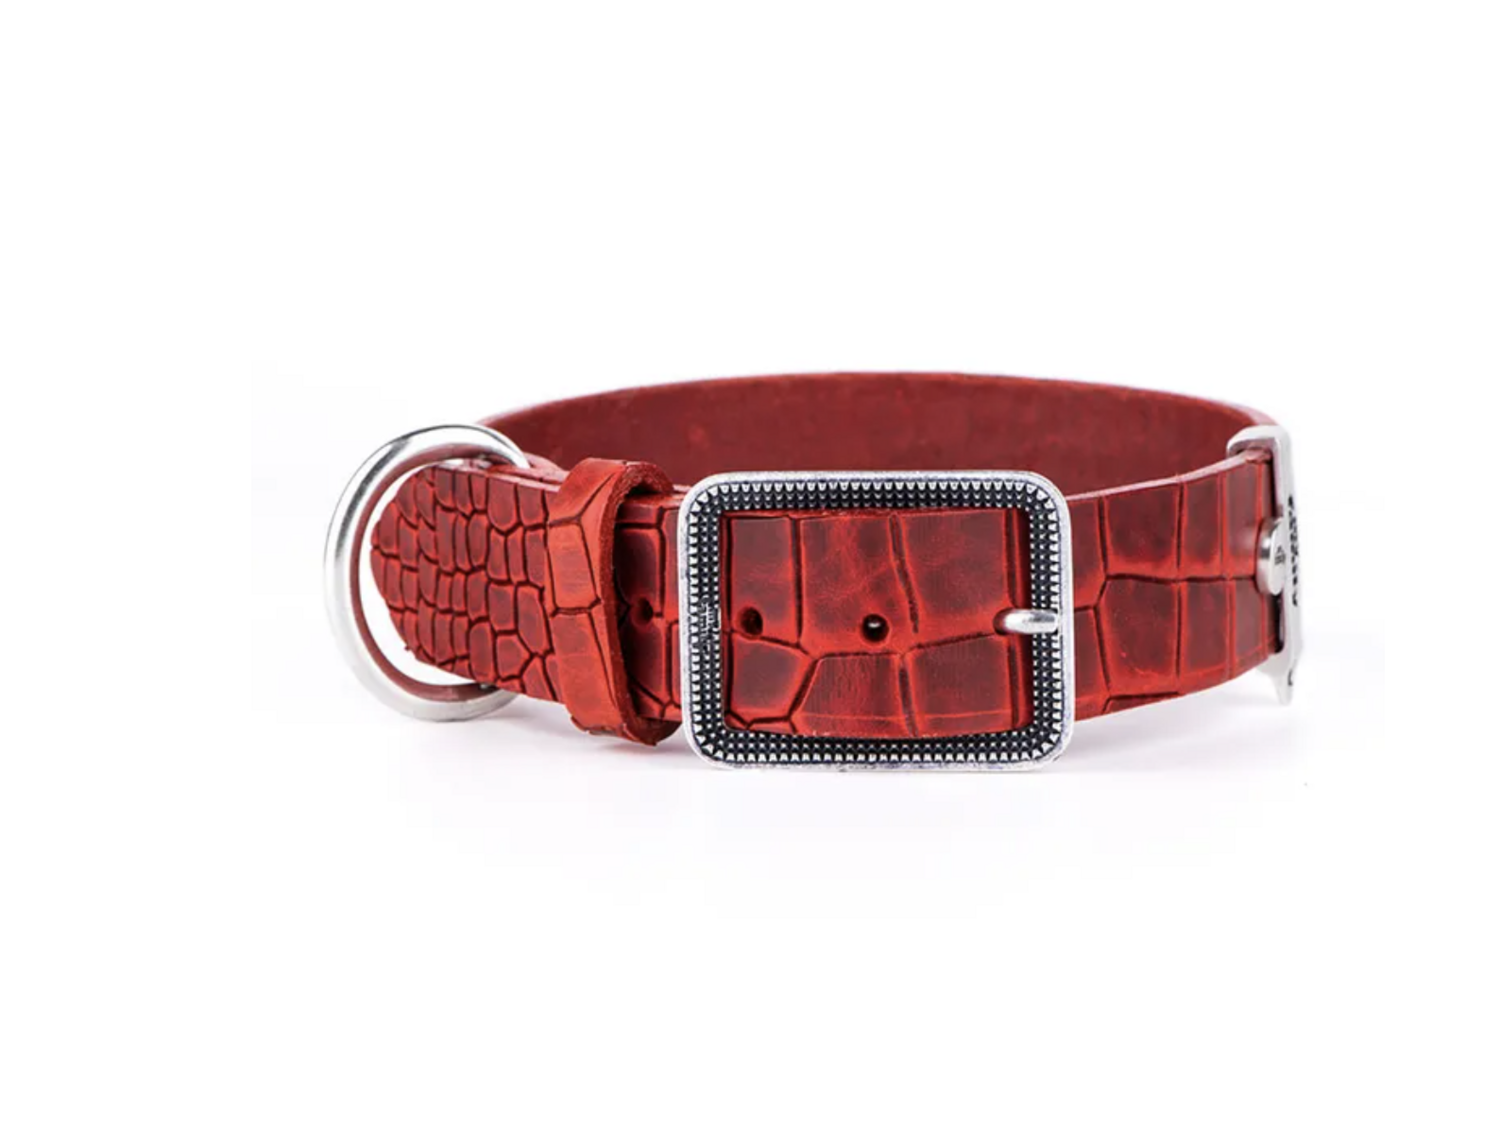 My Family Tucson Collection Red Leather Collar. Medium/Large